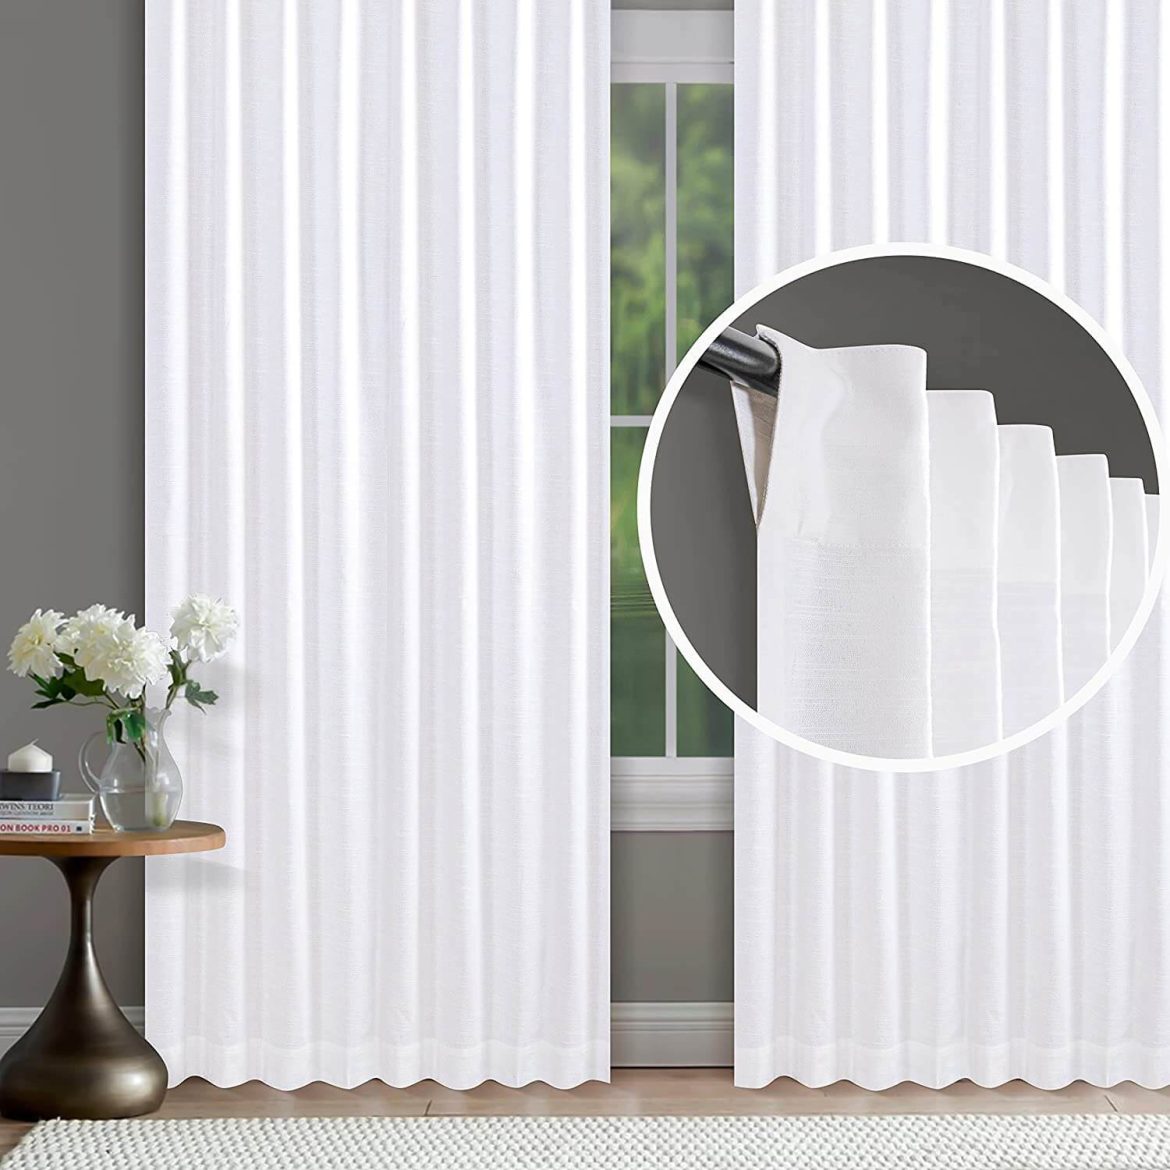 Benefits of Cotton Curtains